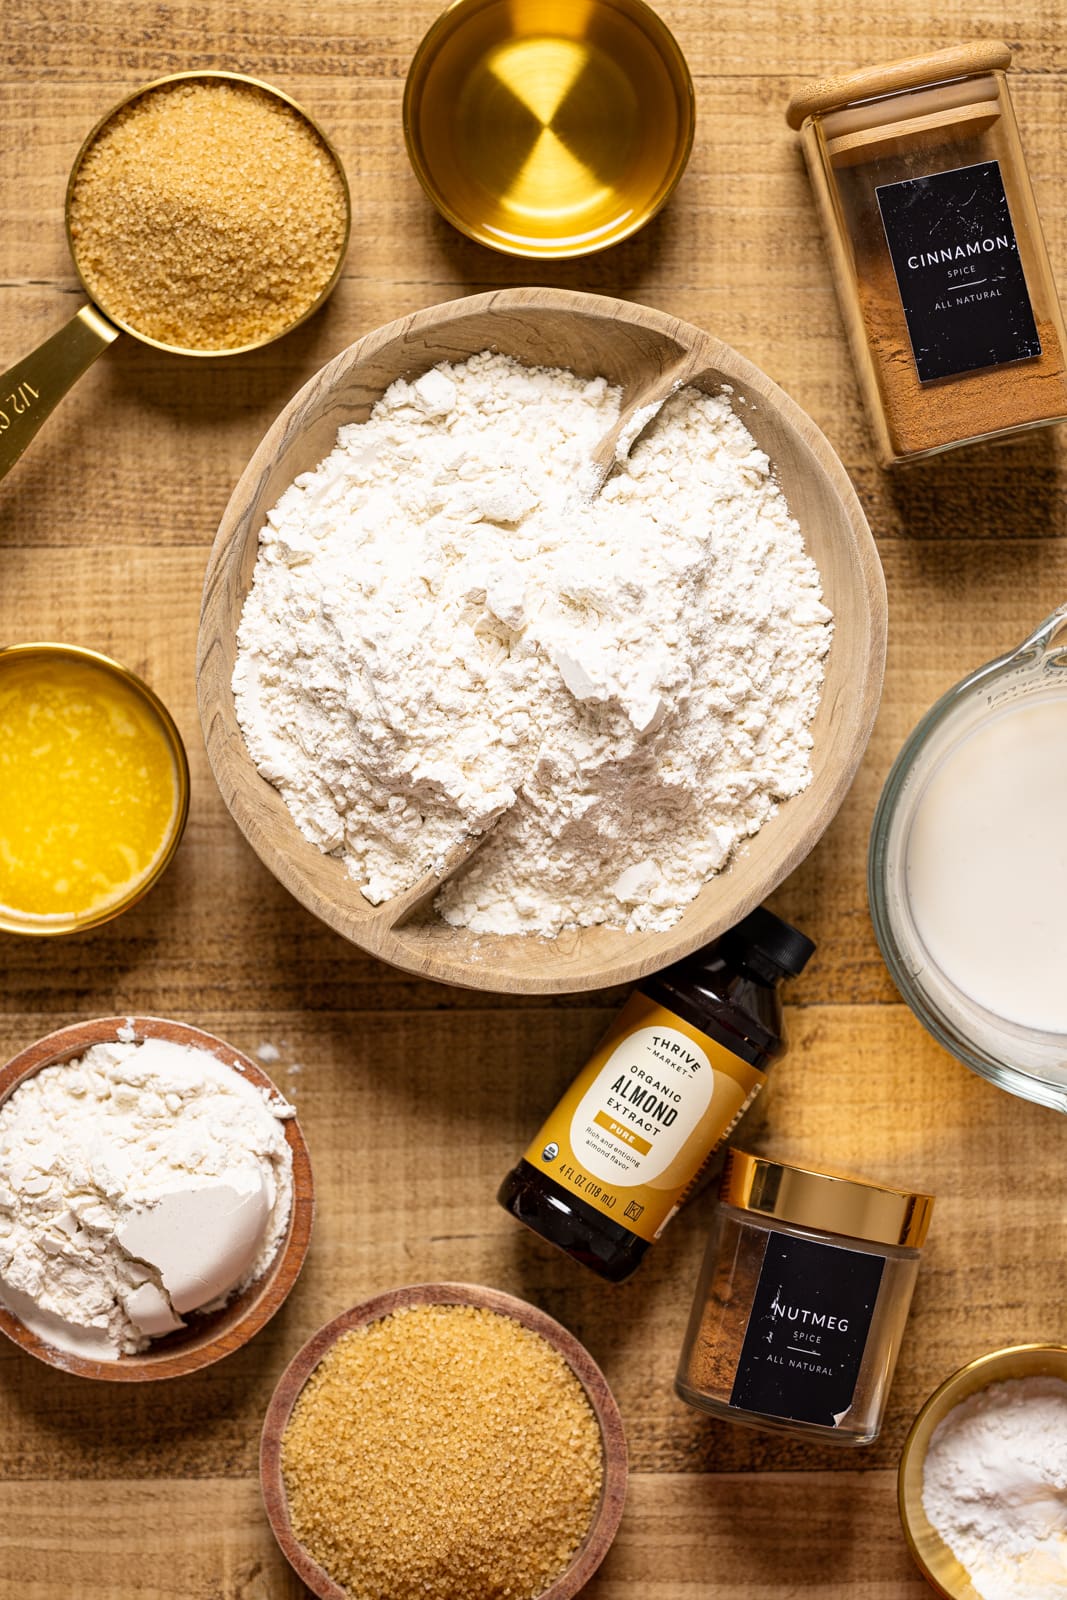 Ingredients on a brown wood table including flour, baking powder, sugar, spices, butter, almond extract, and milk.